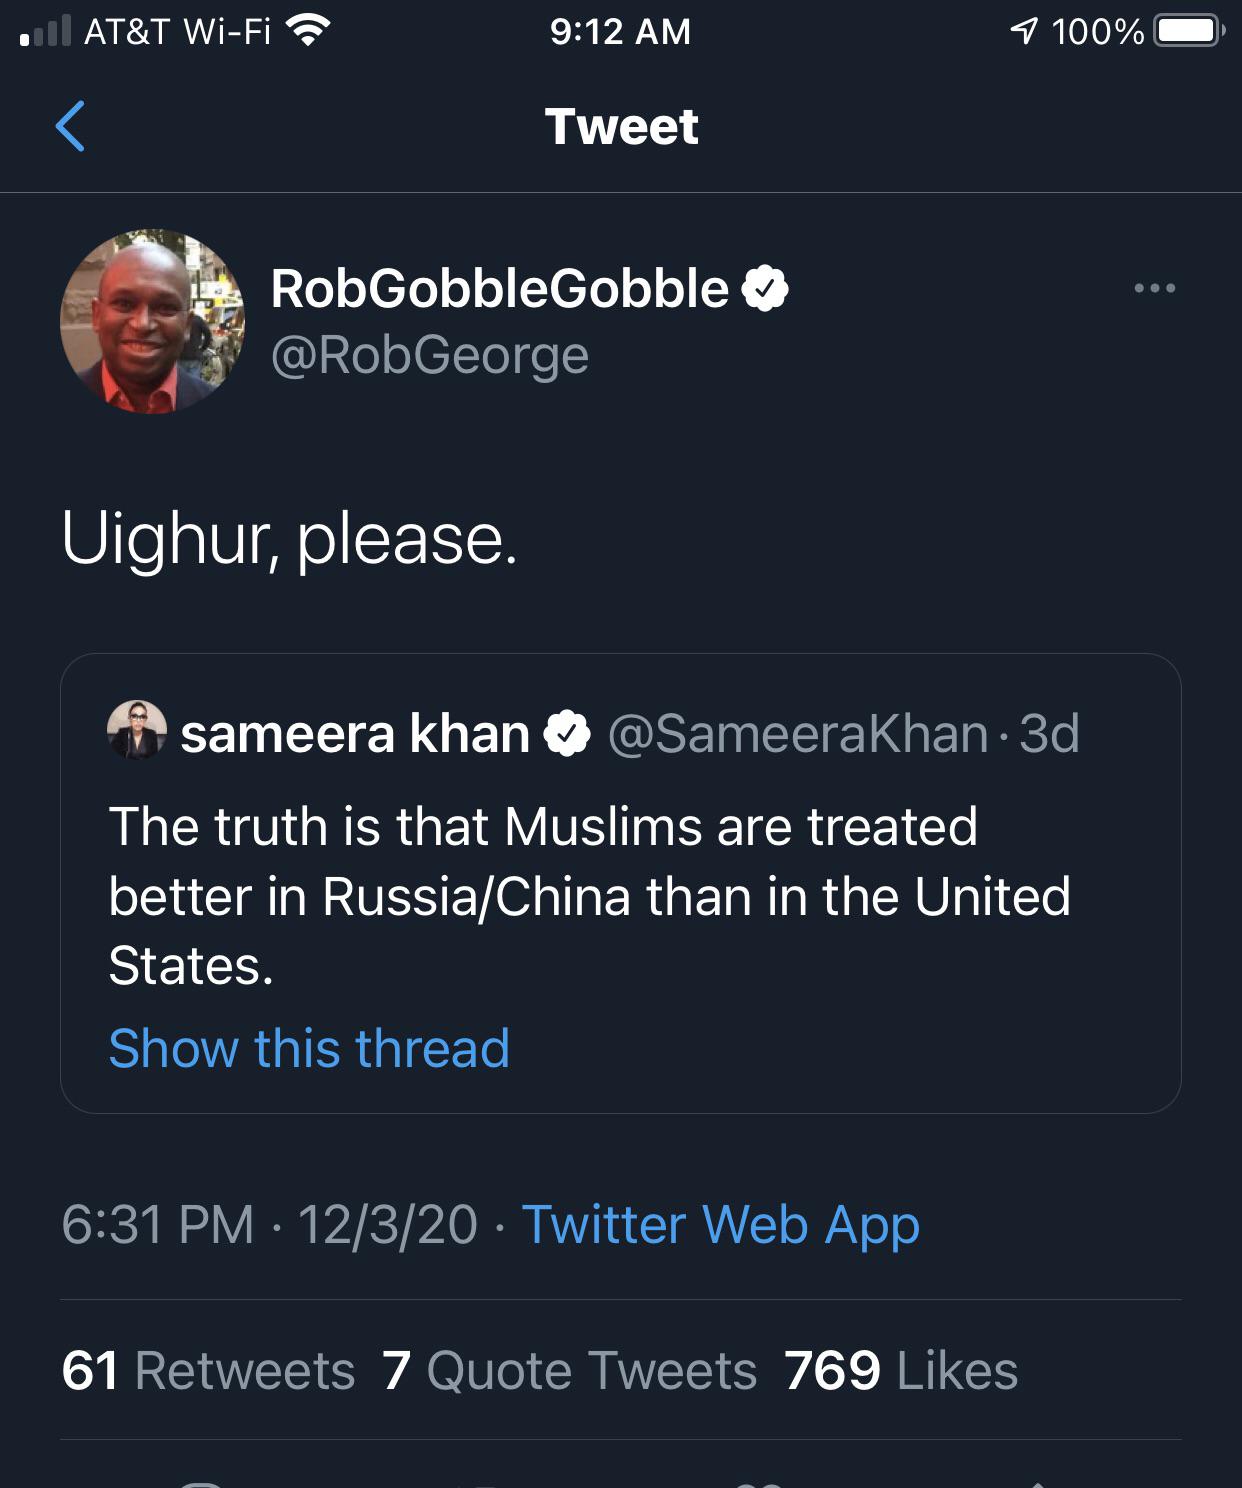 funny comments - Uighur, please. - The truth is that Muslims are treated better in RussiaChina than in the United States.